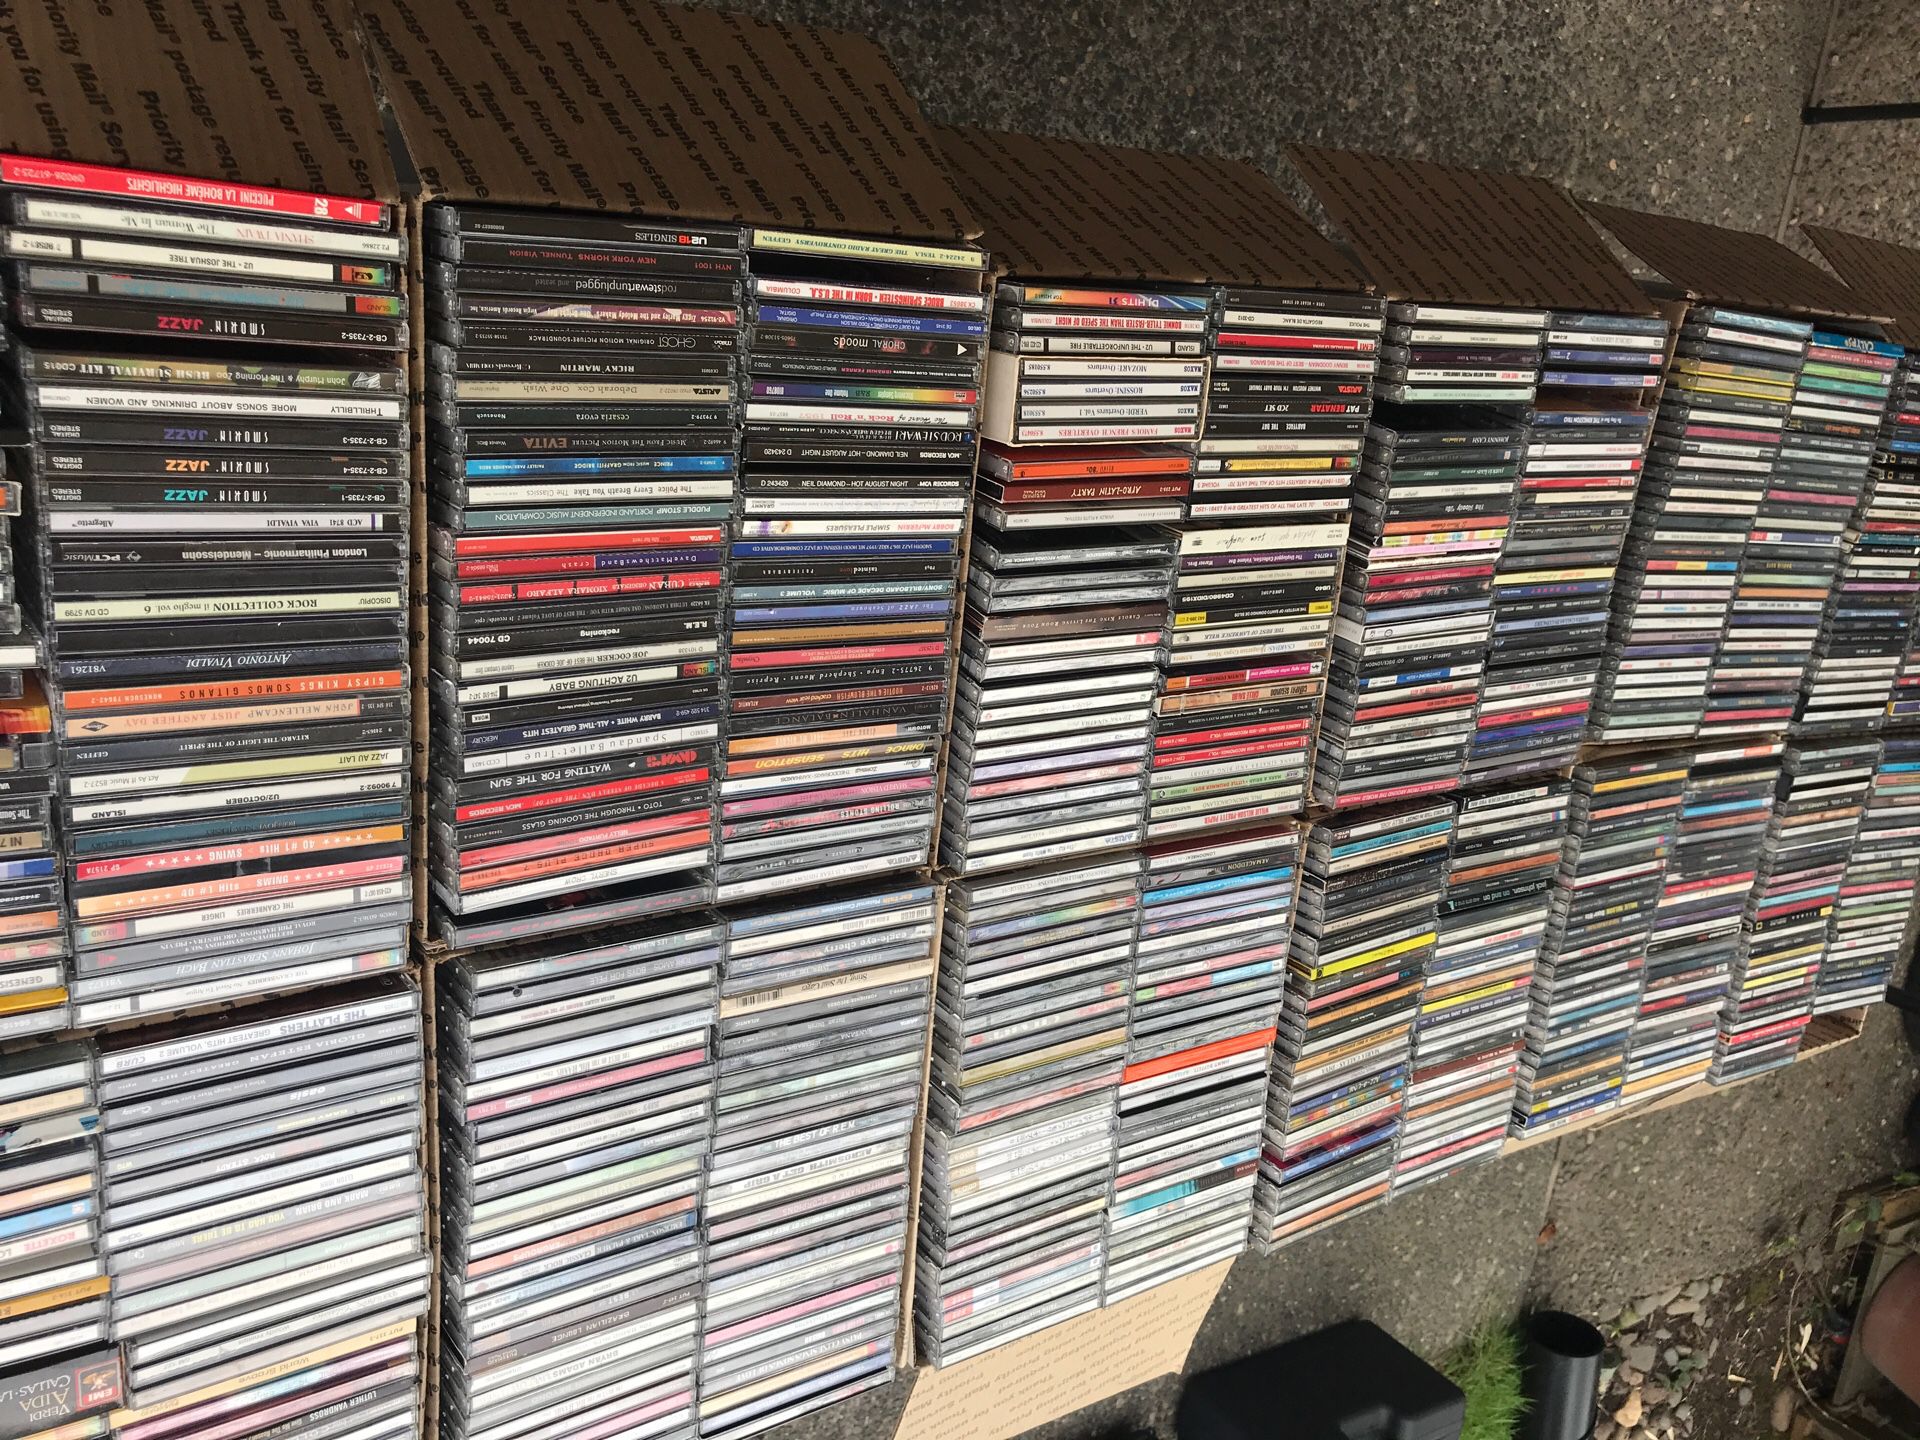 More than 1000 CD with good music